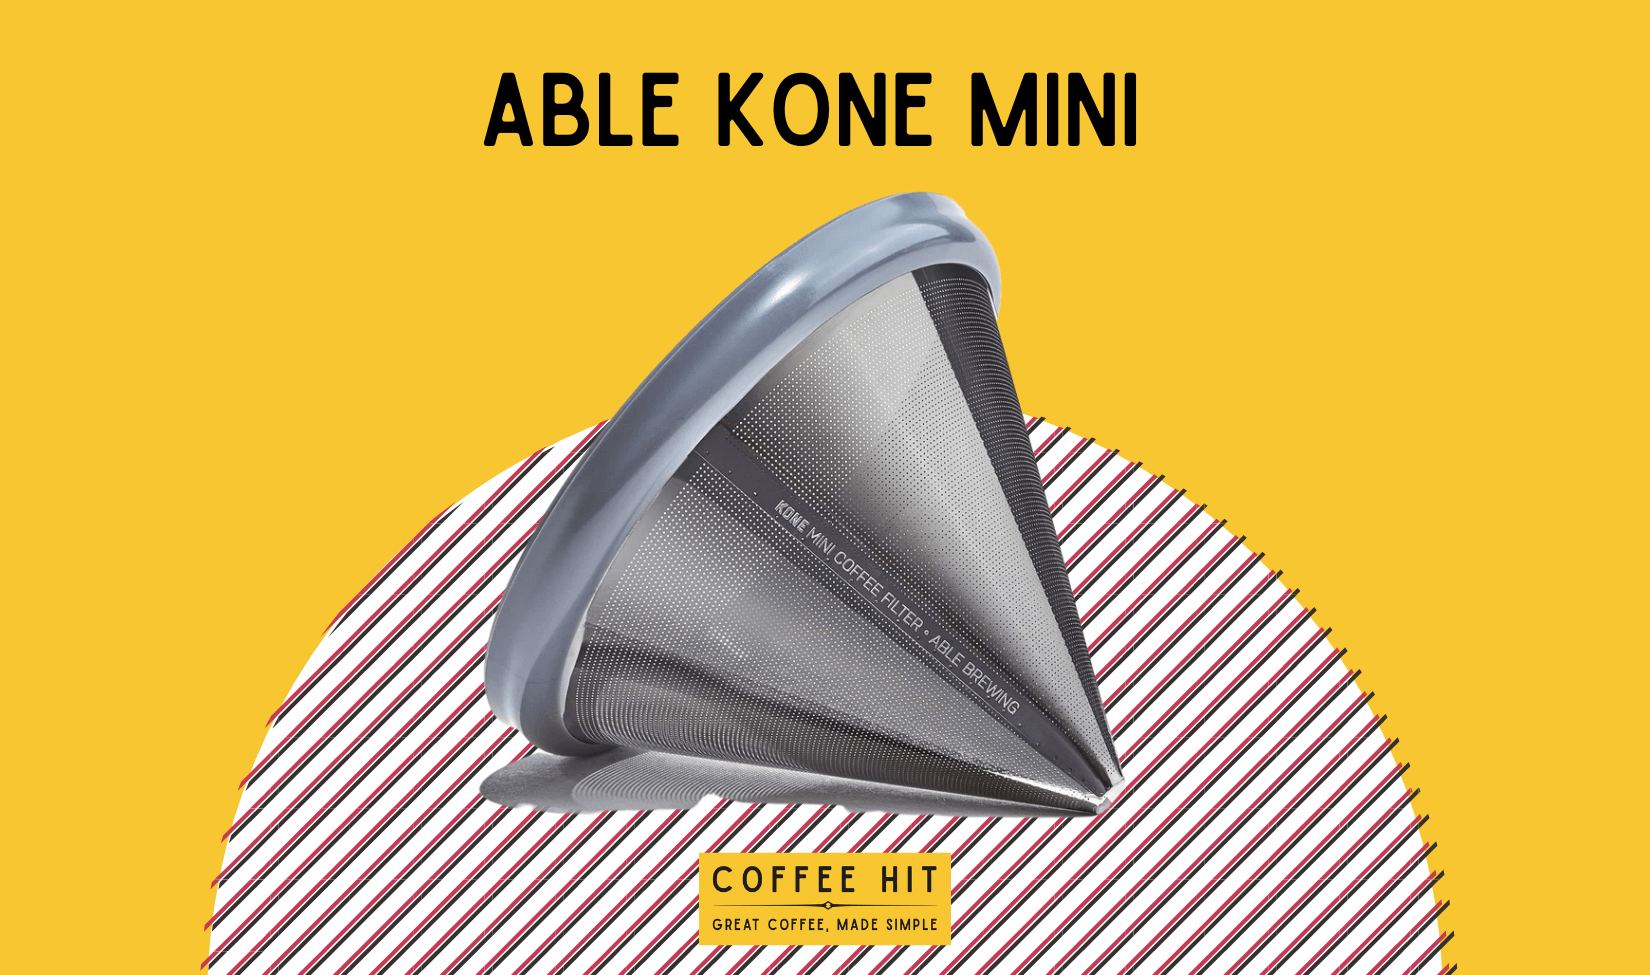 ABLE KONE MINI FOR THE V60 - Coffee Hit